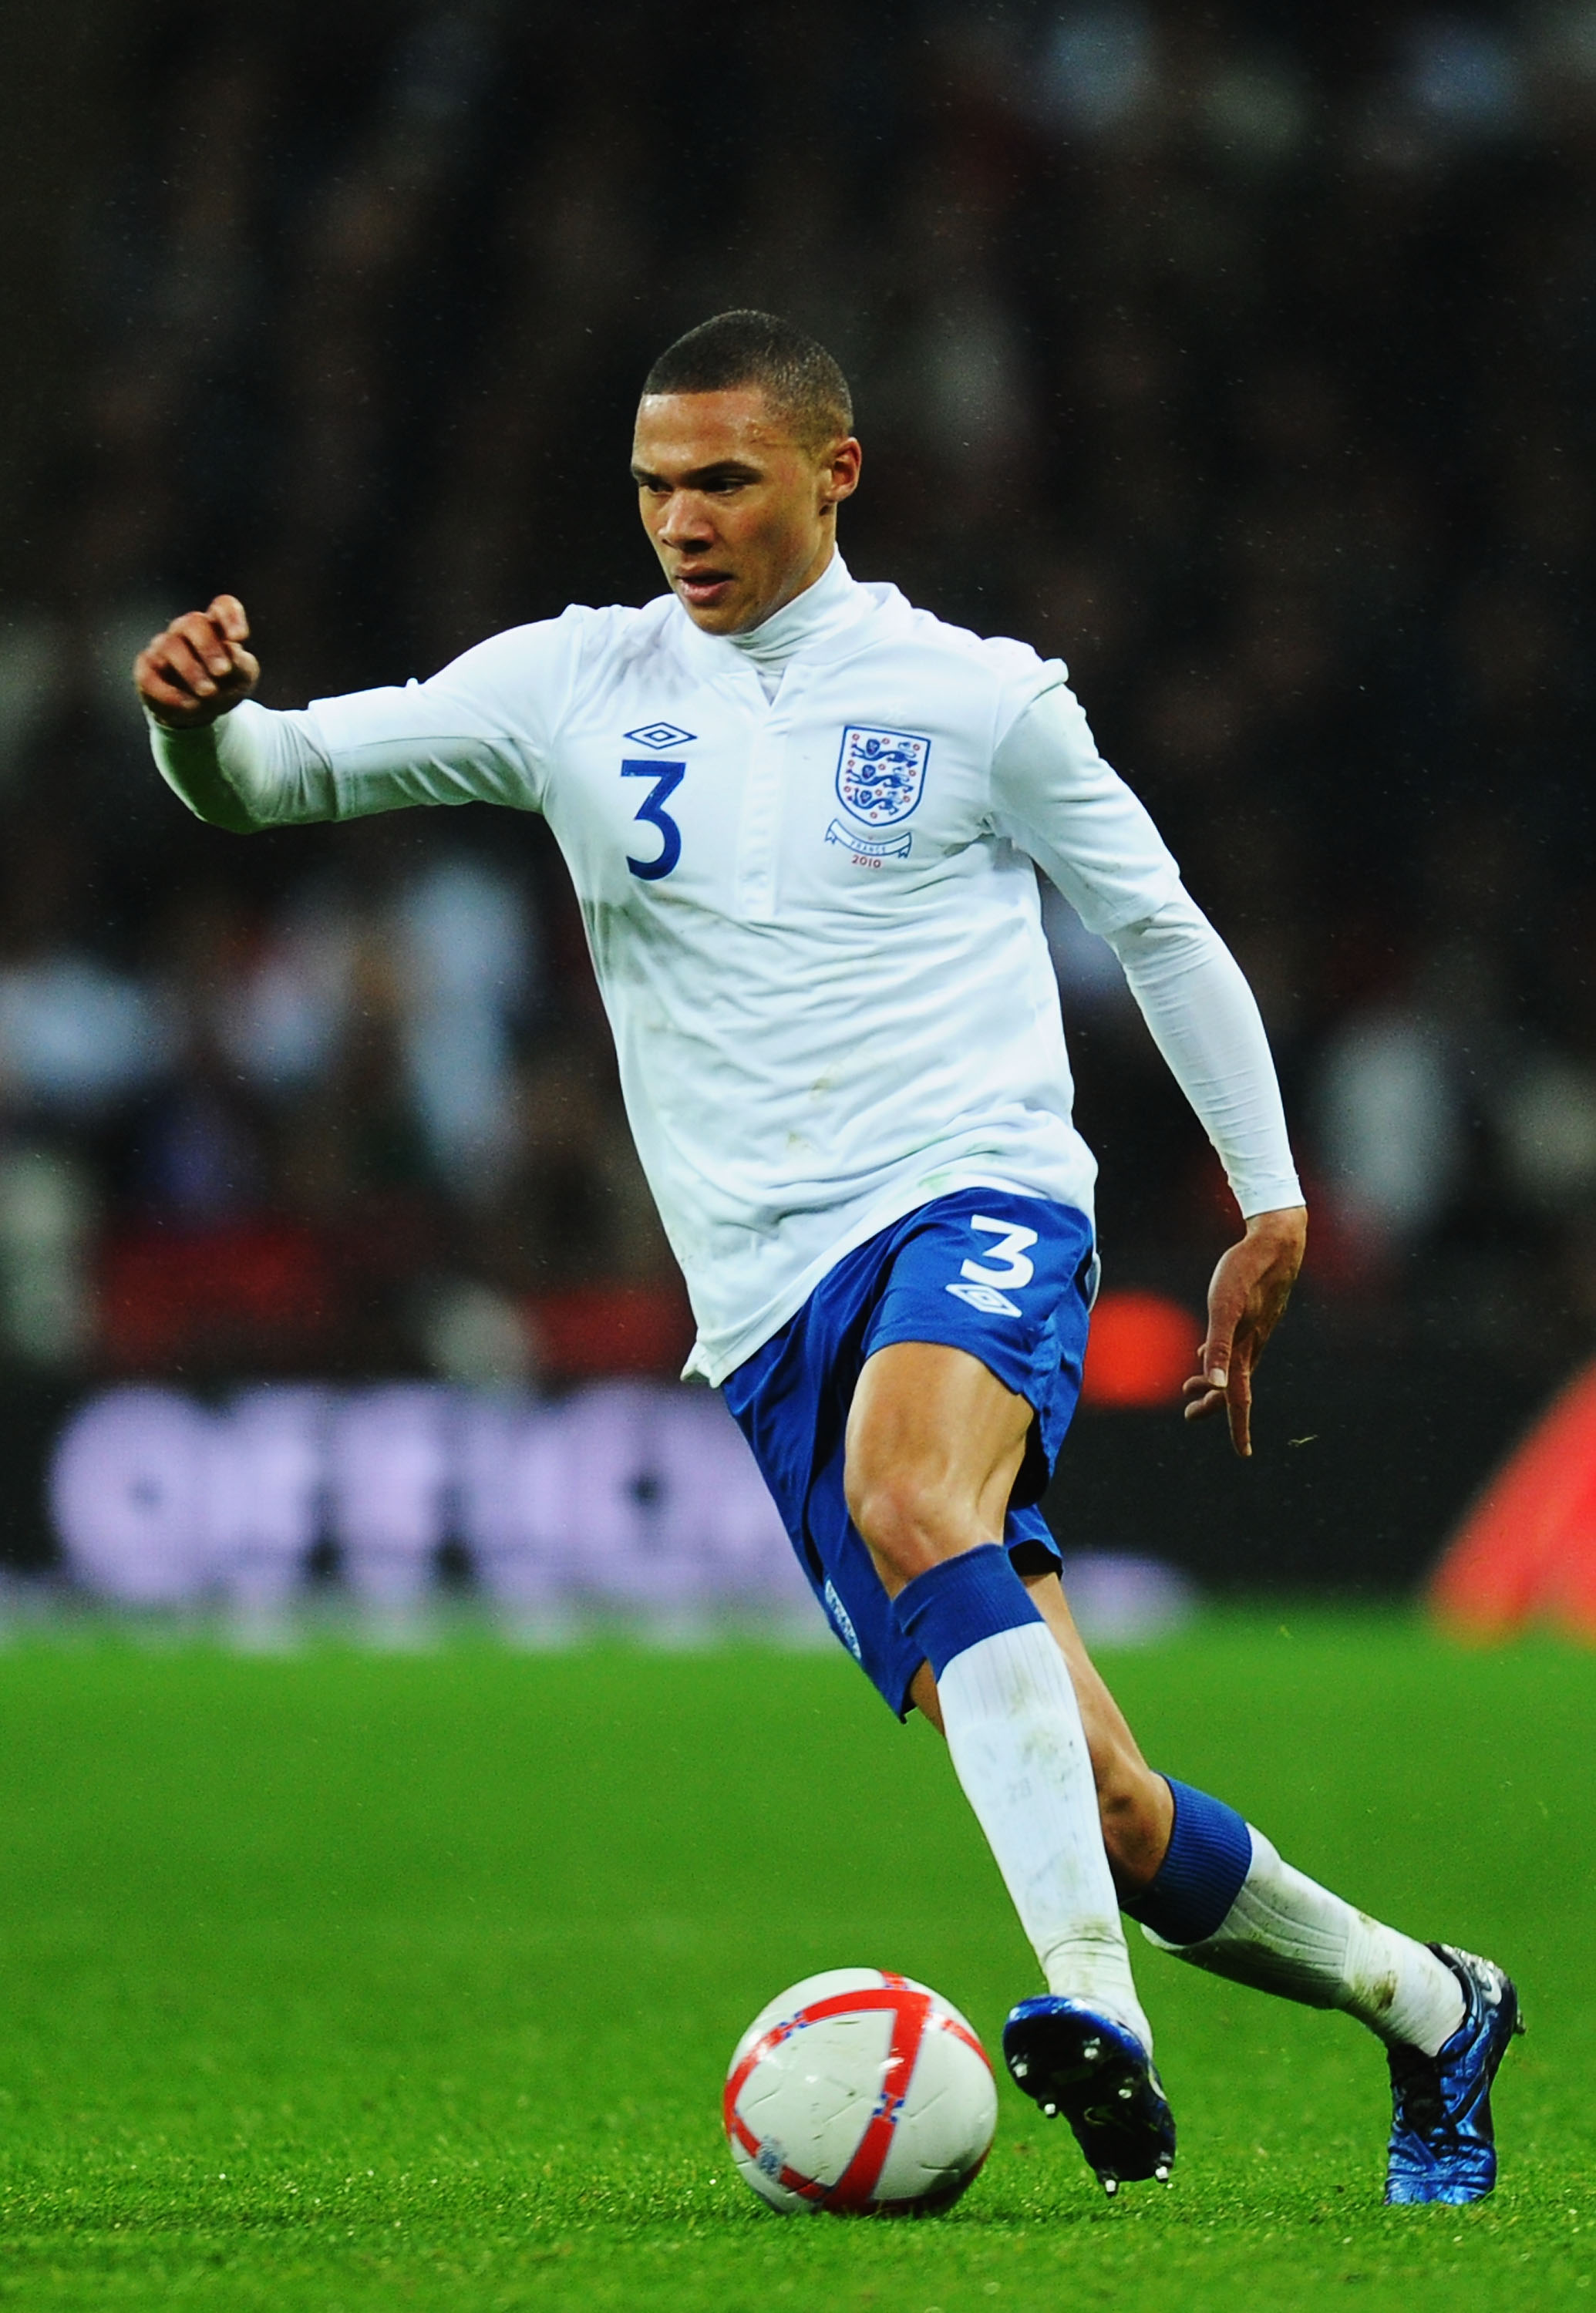 LONDON, ENGLAND - NOVEMBER 17:  Kieran Gibbs of England runs with the ball during the international friendly match between England and France at Wembley Stadium on November 17, 2010 in London, England.  (Photo by Mike Hewitt/Getty Images)